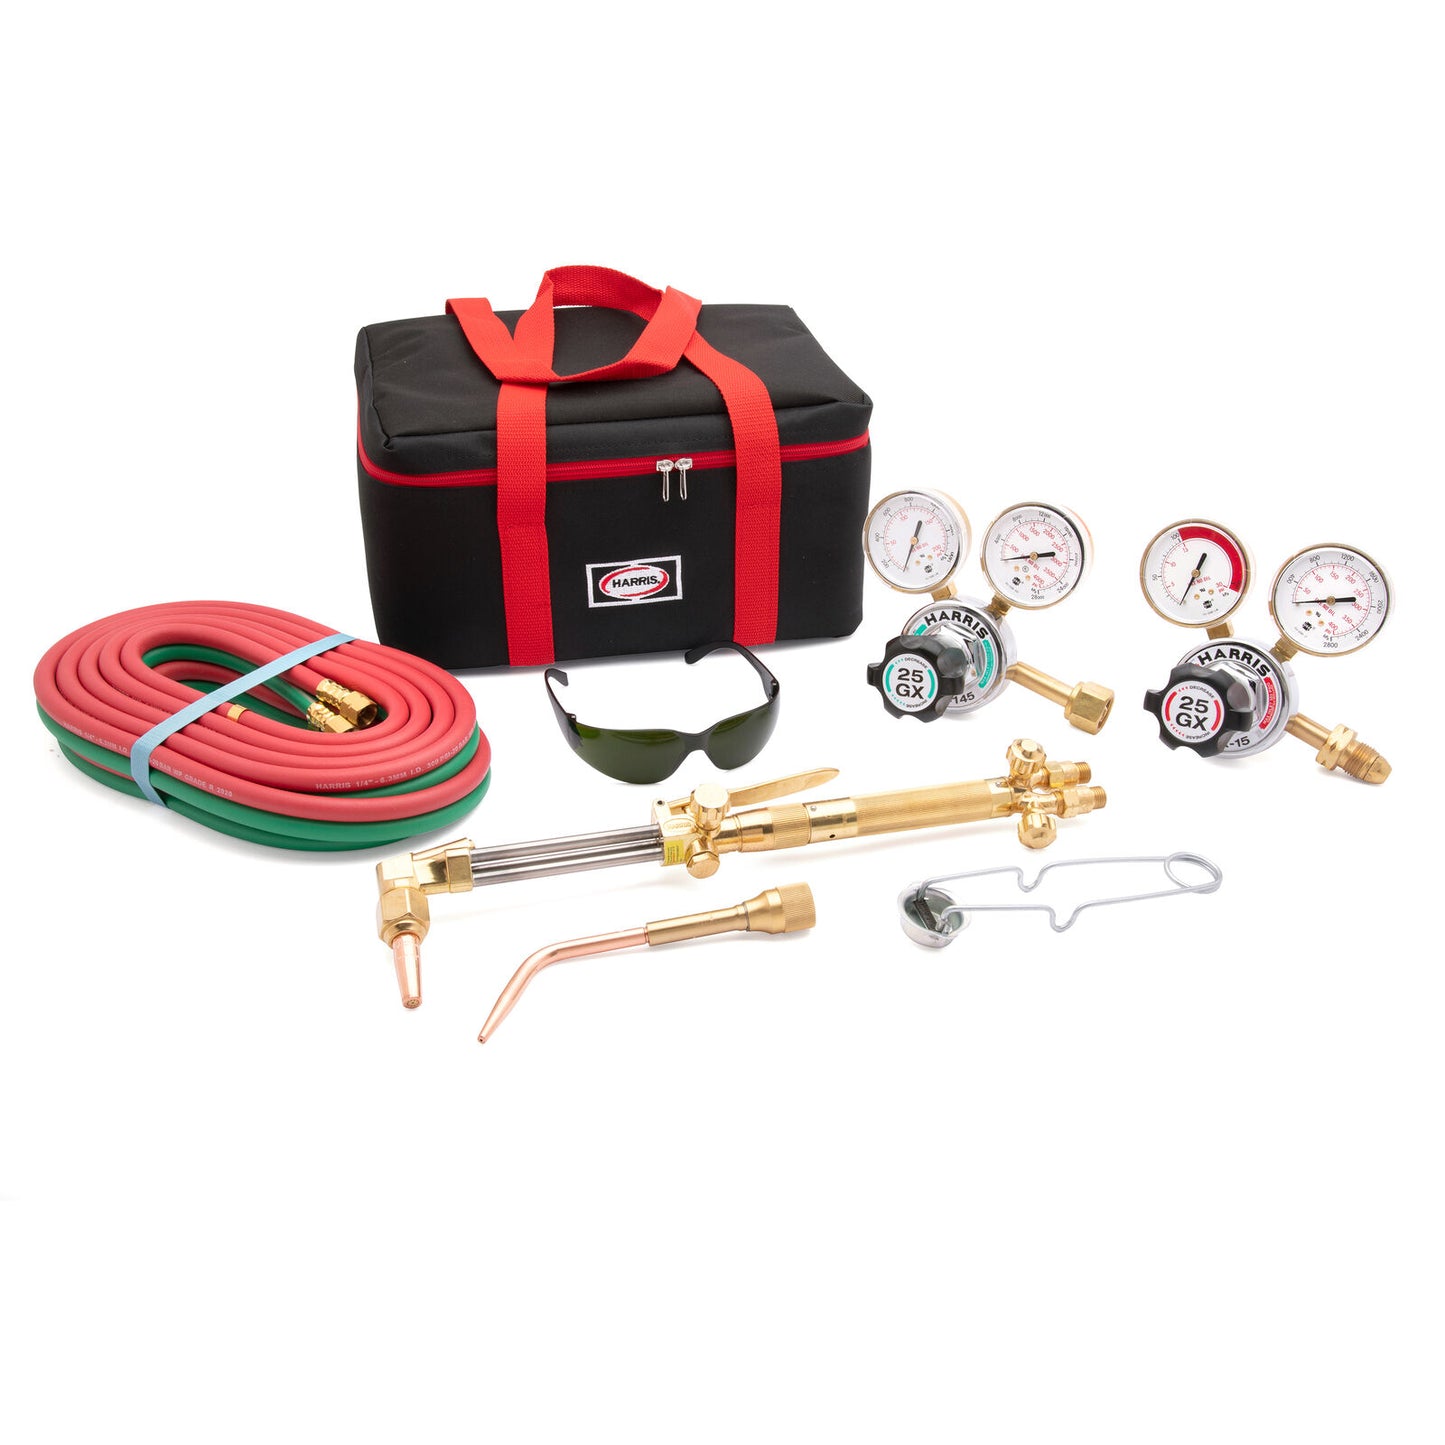 Harris 4400367 Ironworker Heavy Duty Torch Kit Outfit